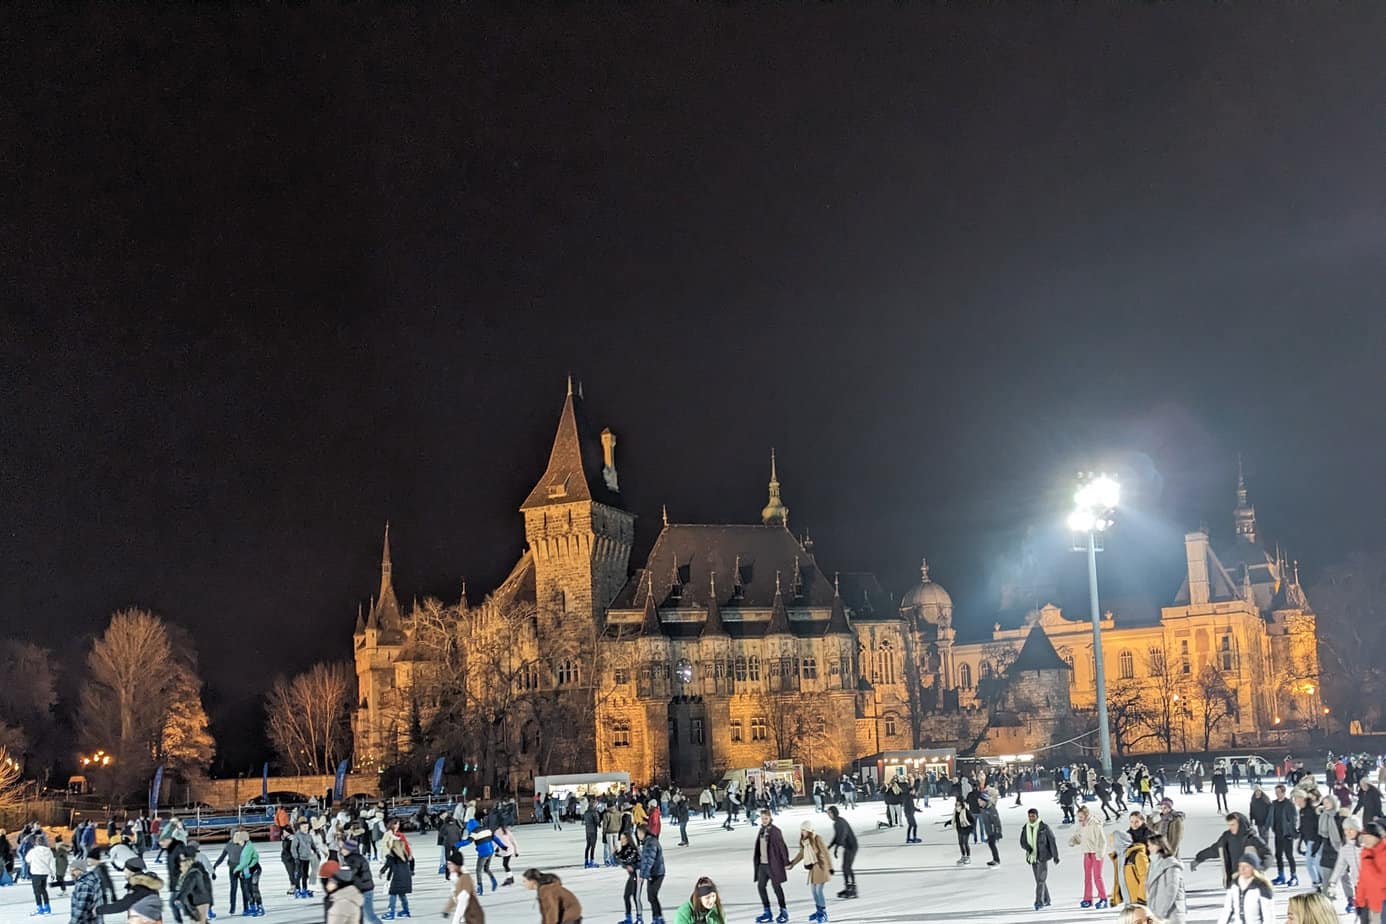 Vajdahunyad Castle with skating rink at night. People skating on the ice under the lights.